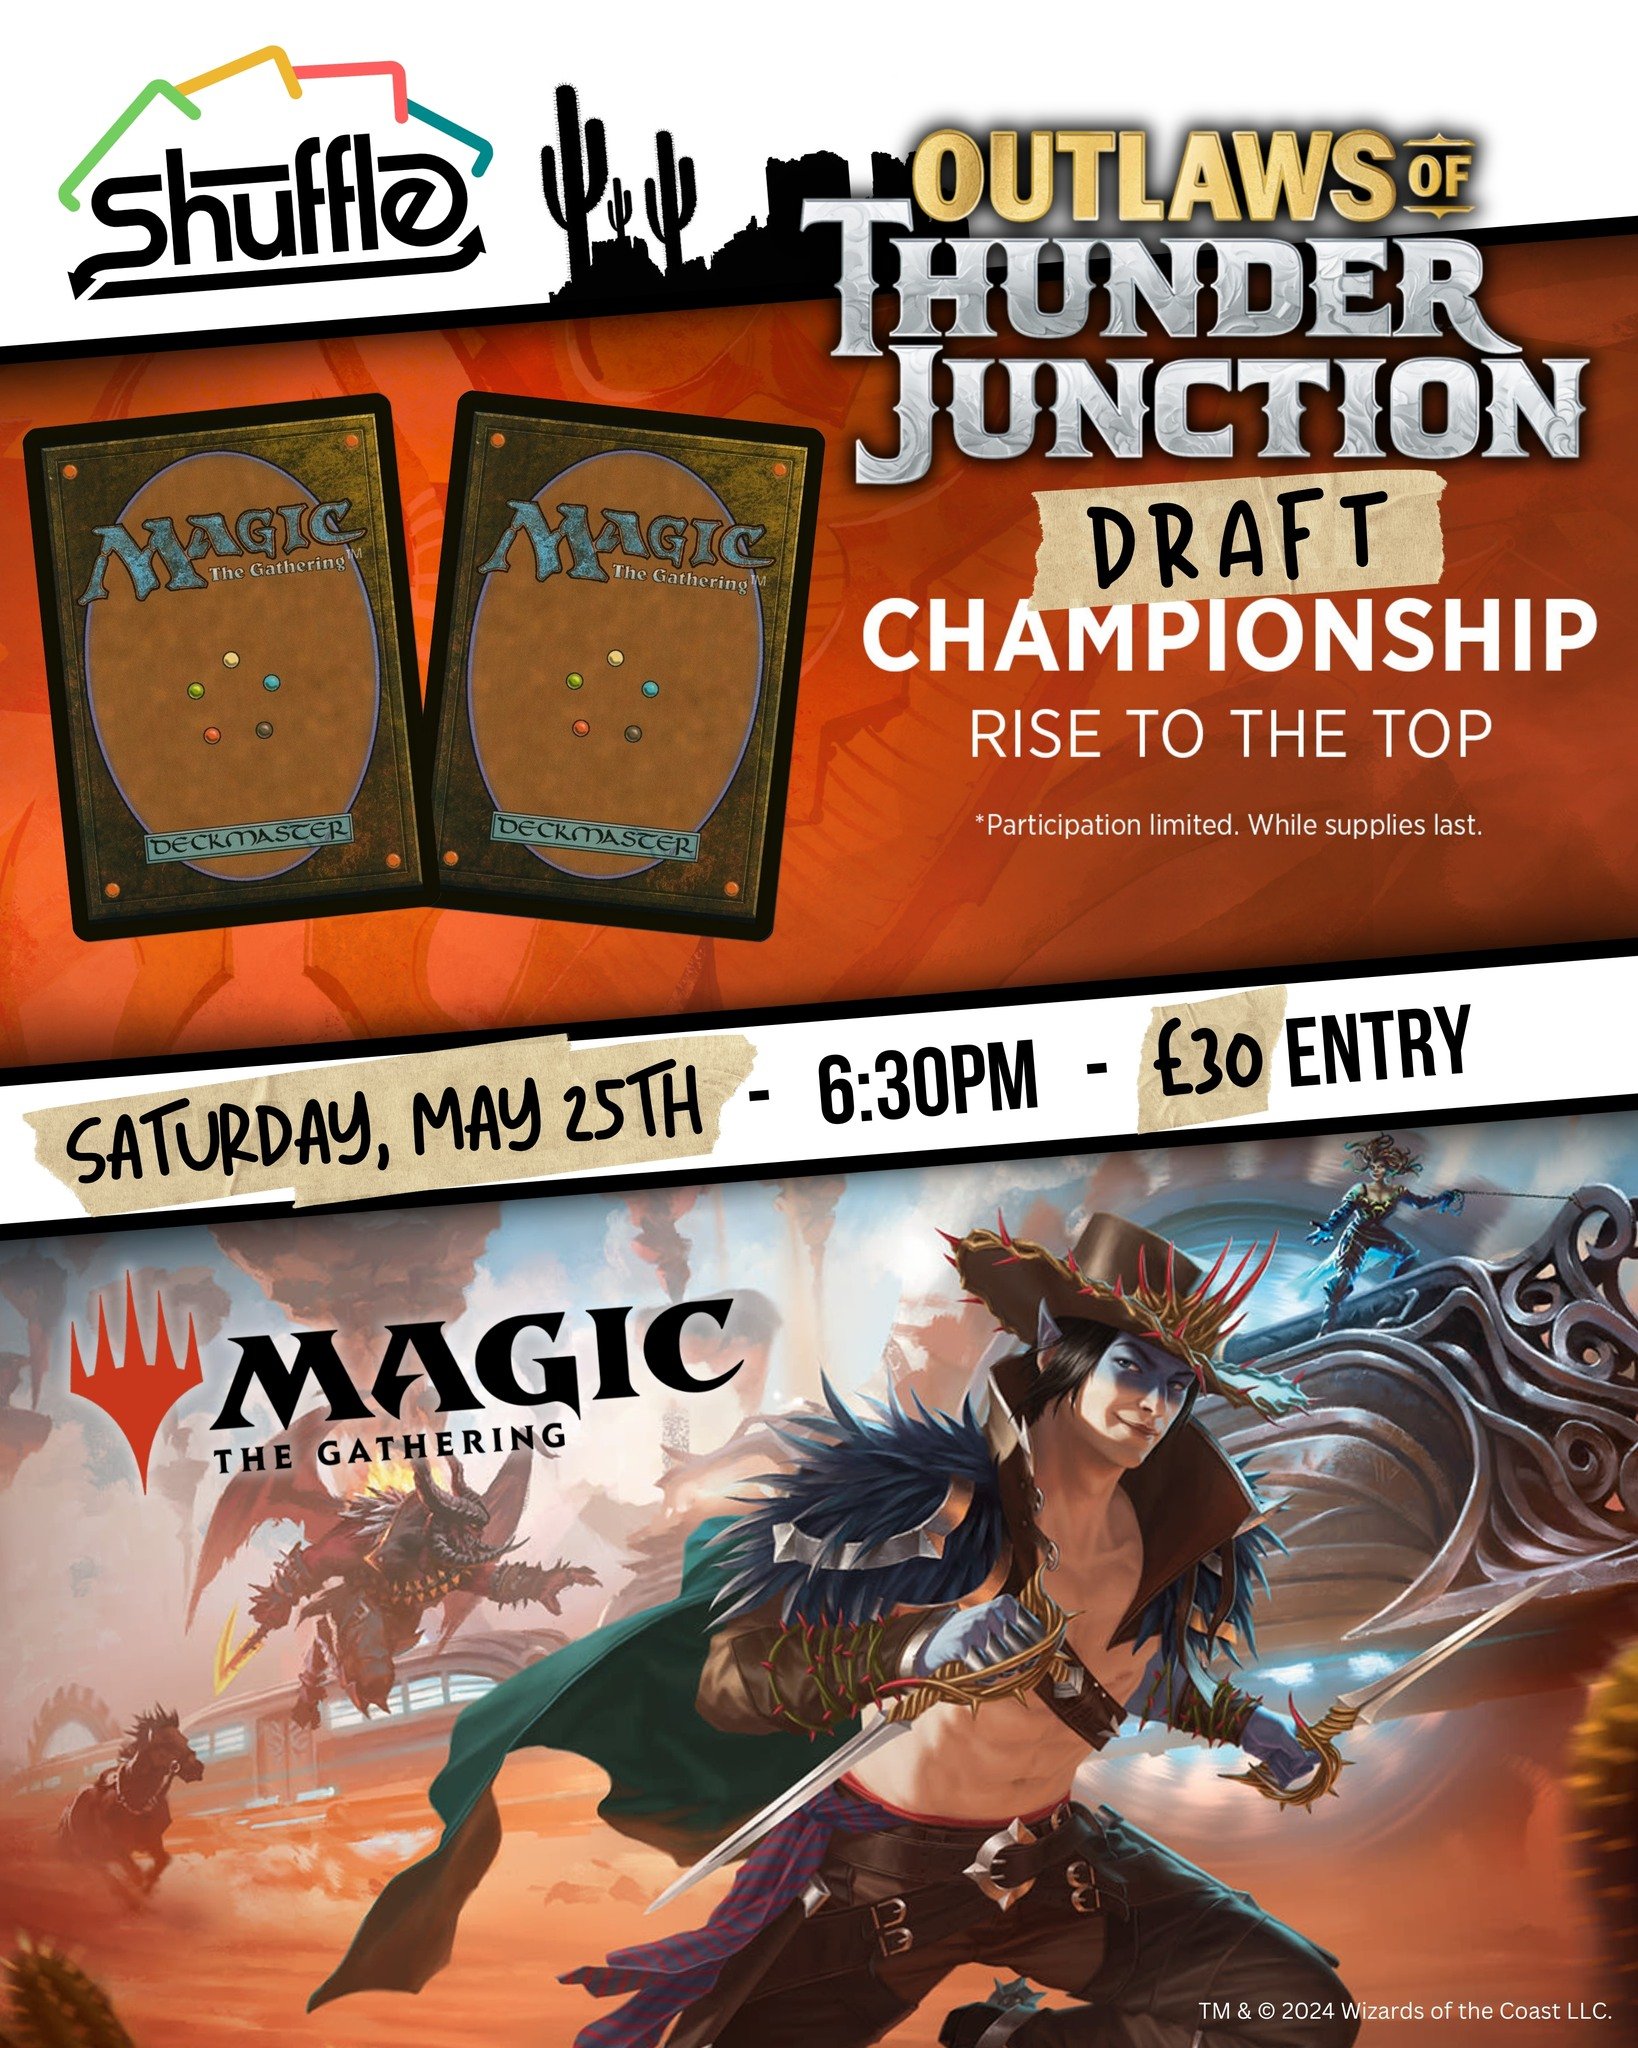 Saddle up, partner! 🐎 It's time for another MTG DRAFT CHAMPIONSHIP. 🤠 

🌵 THUNDER JUNCTION DRAFT CHAMPIONSHIP 🌵

🗓️ Date: Saturday, May 25th
🕡Time: 6:30pm (until approx. 10:30pm)
🪙 Entry Fee*: &pound;30 per person

For each participant, we wil